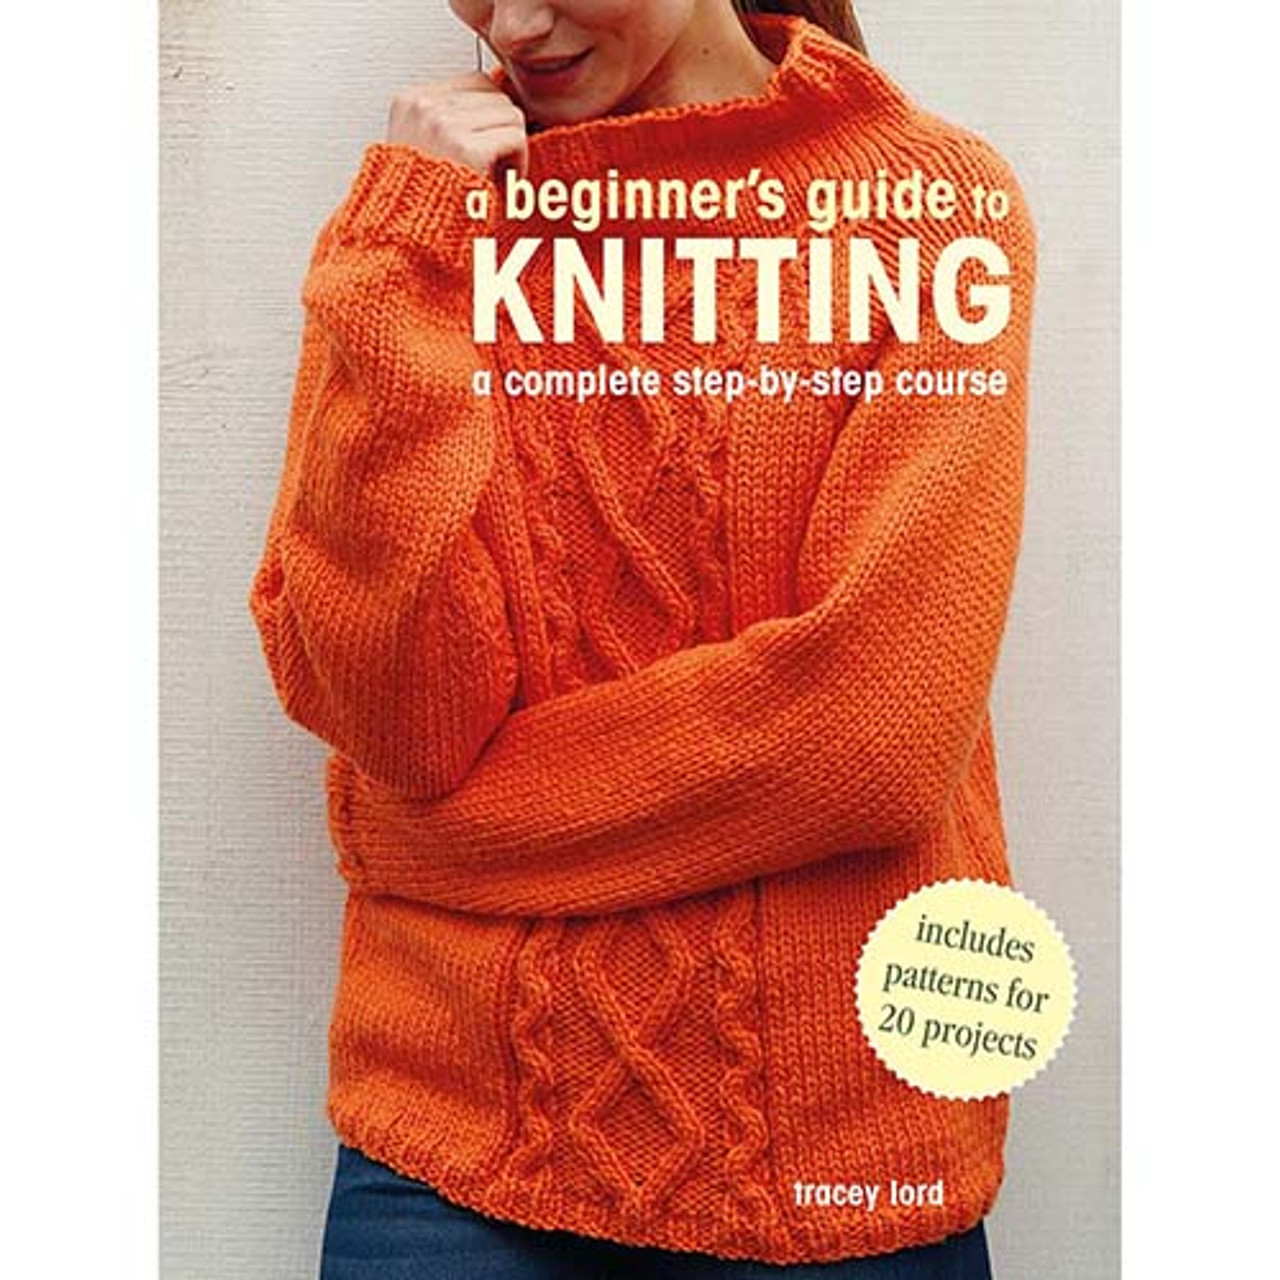 Knitting for Beginners: Easy Step by Step Guide & Patterns to